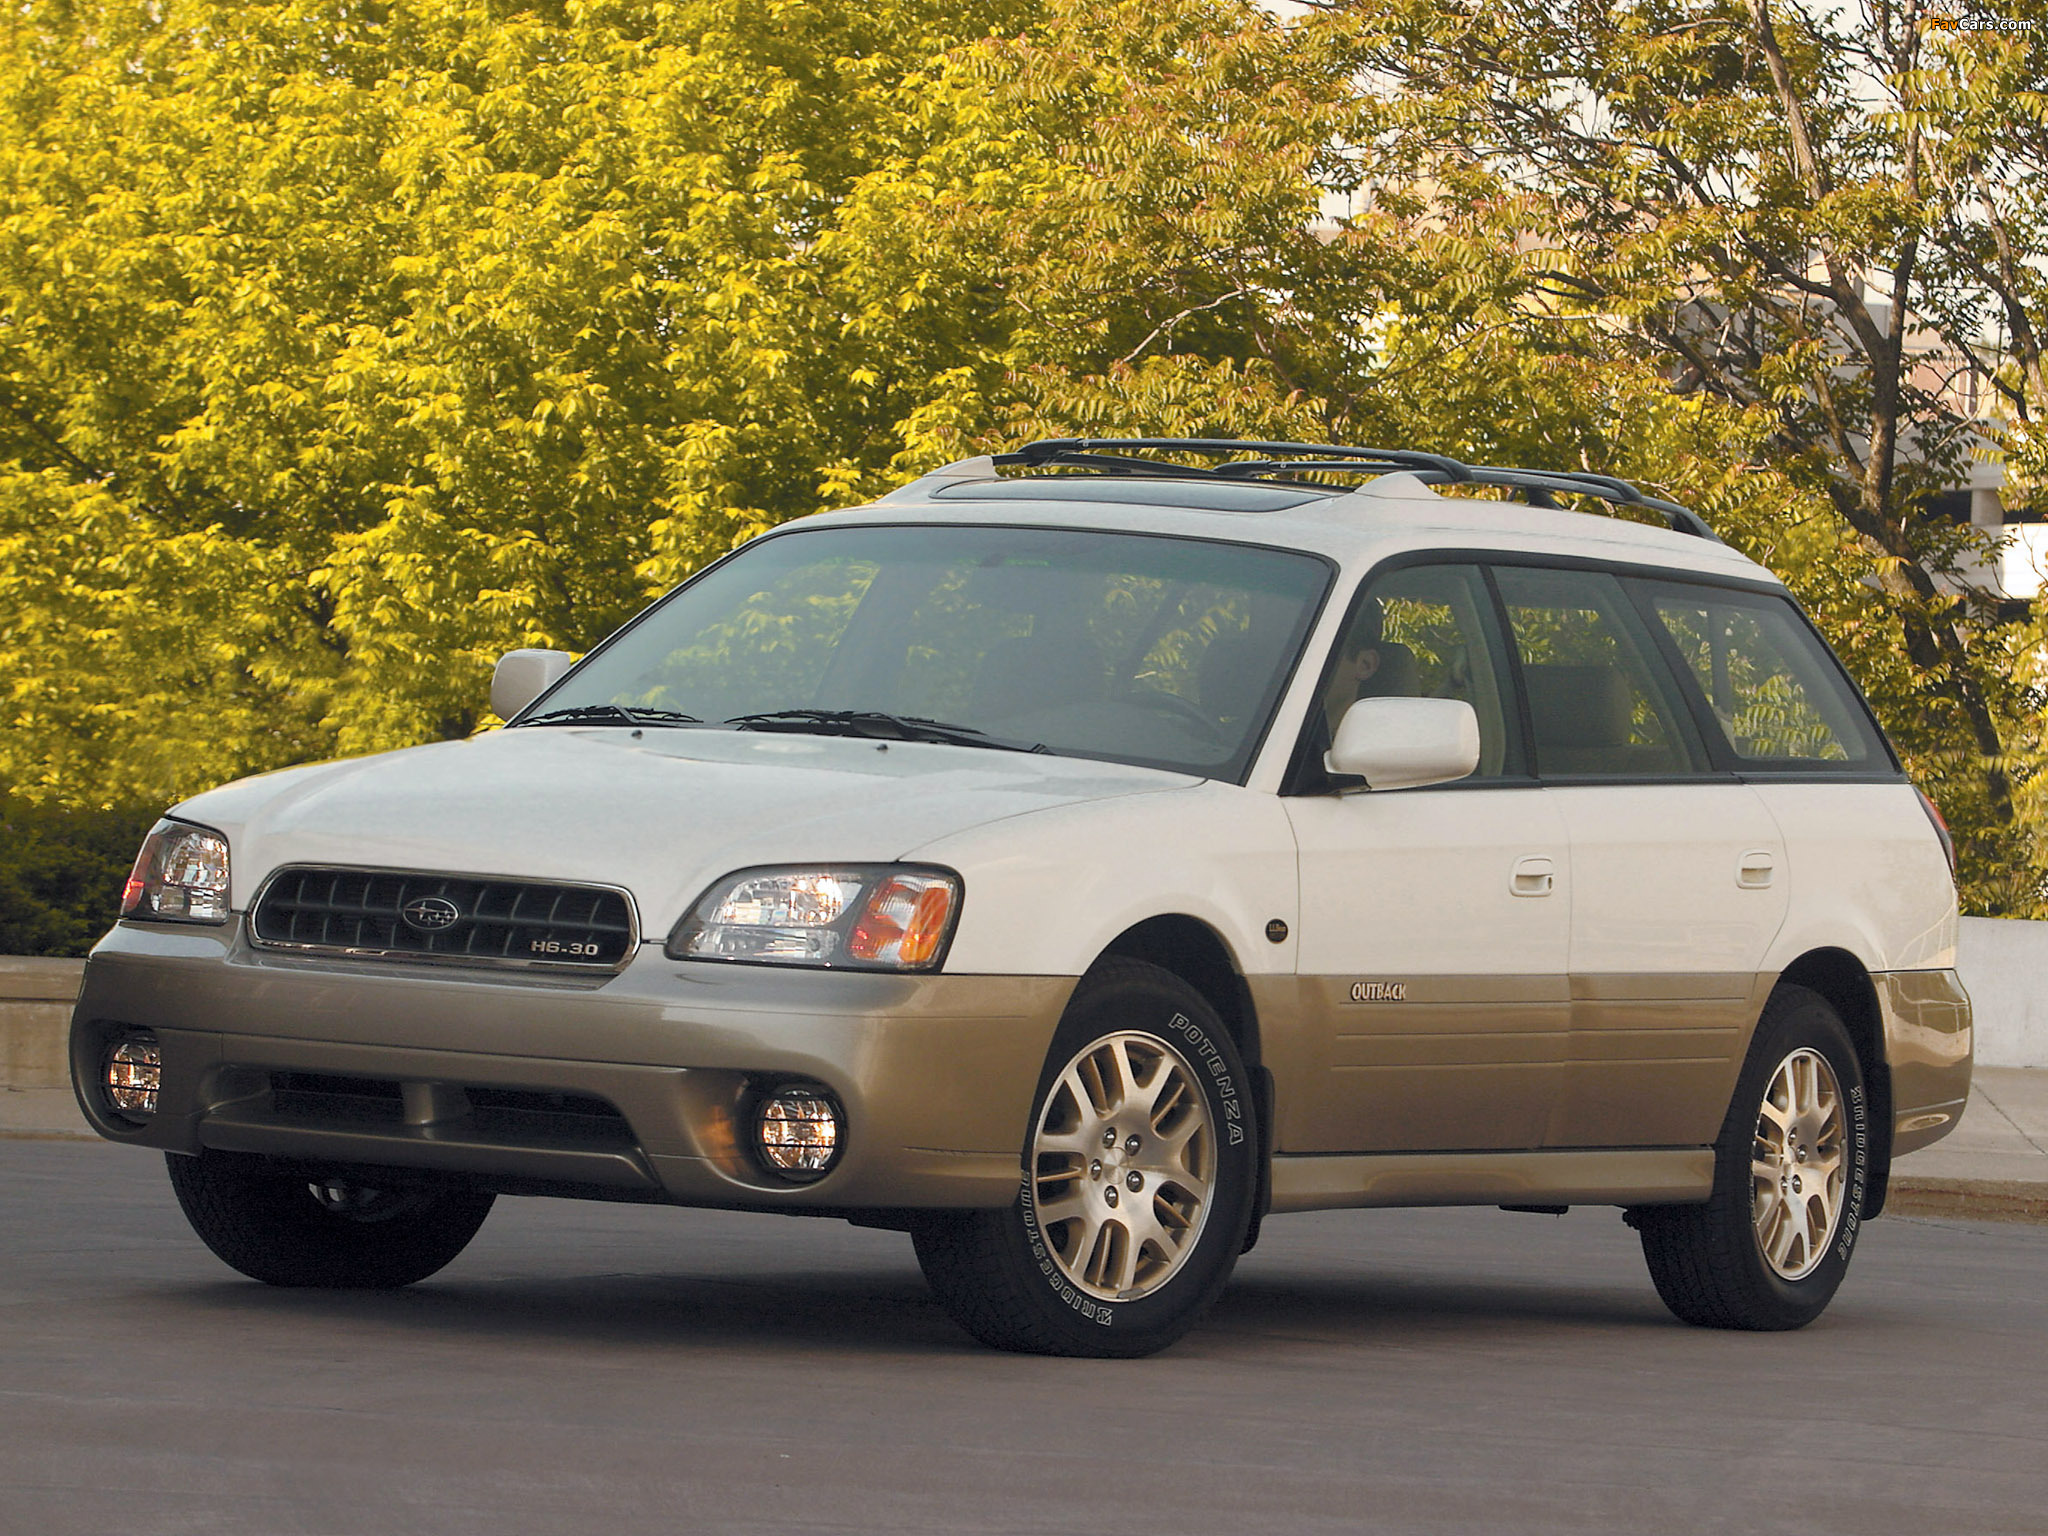 Images of Subaru Outback H63.0 USspec 200003 (2048x1536)